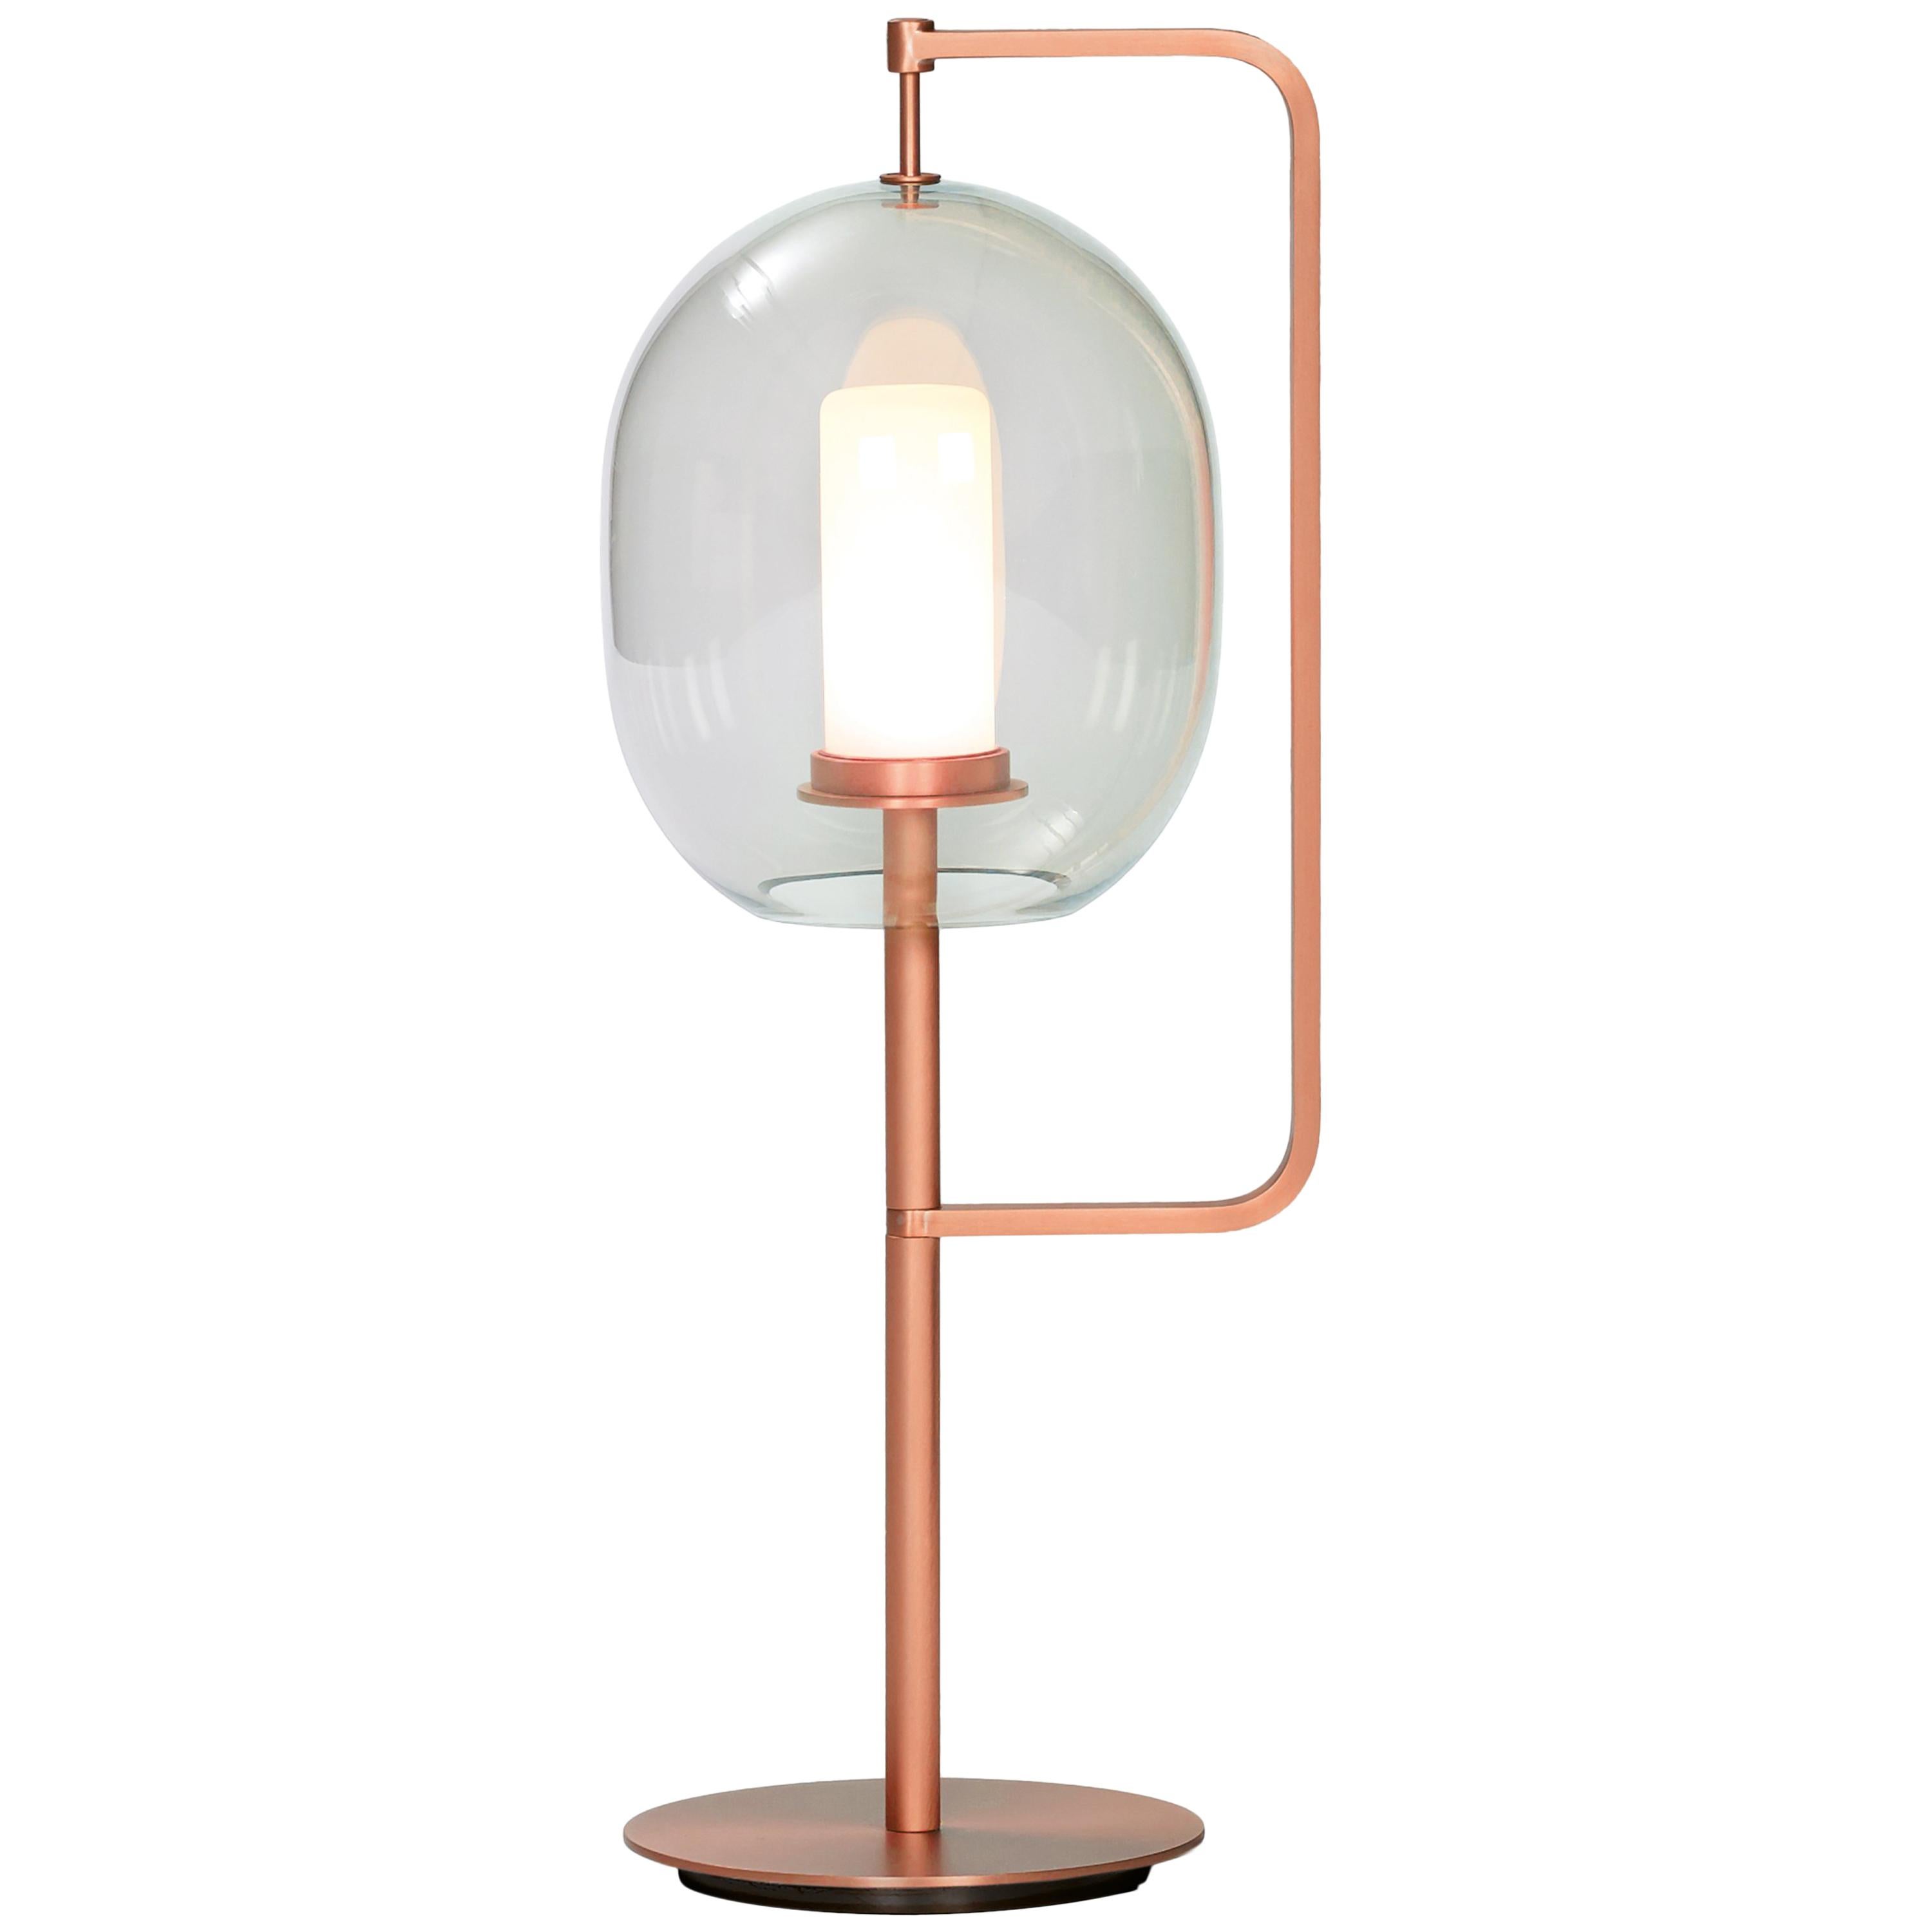 ClassiCon Lantern Light Table Lamp in Copper-Plated Brass by Neri&Hu